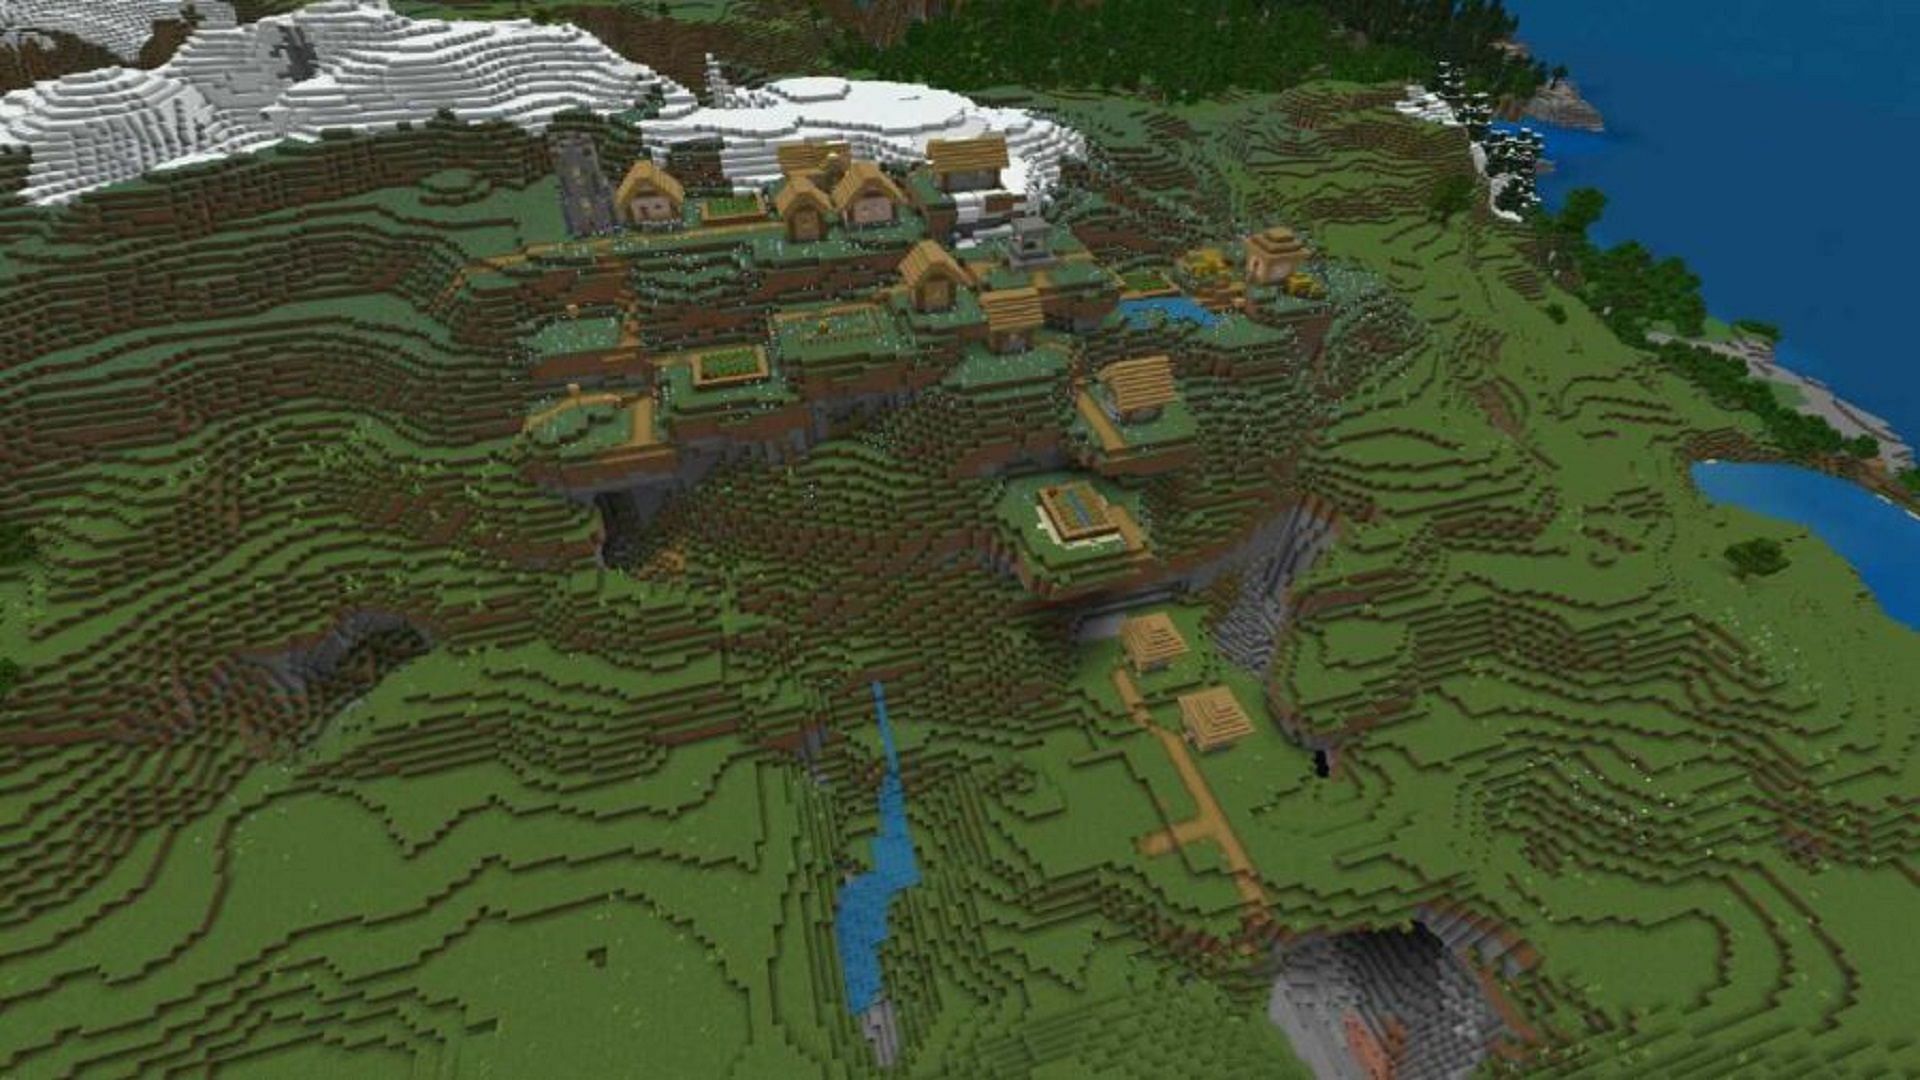 10 new seeds for finding villages in Minecraft 1.19